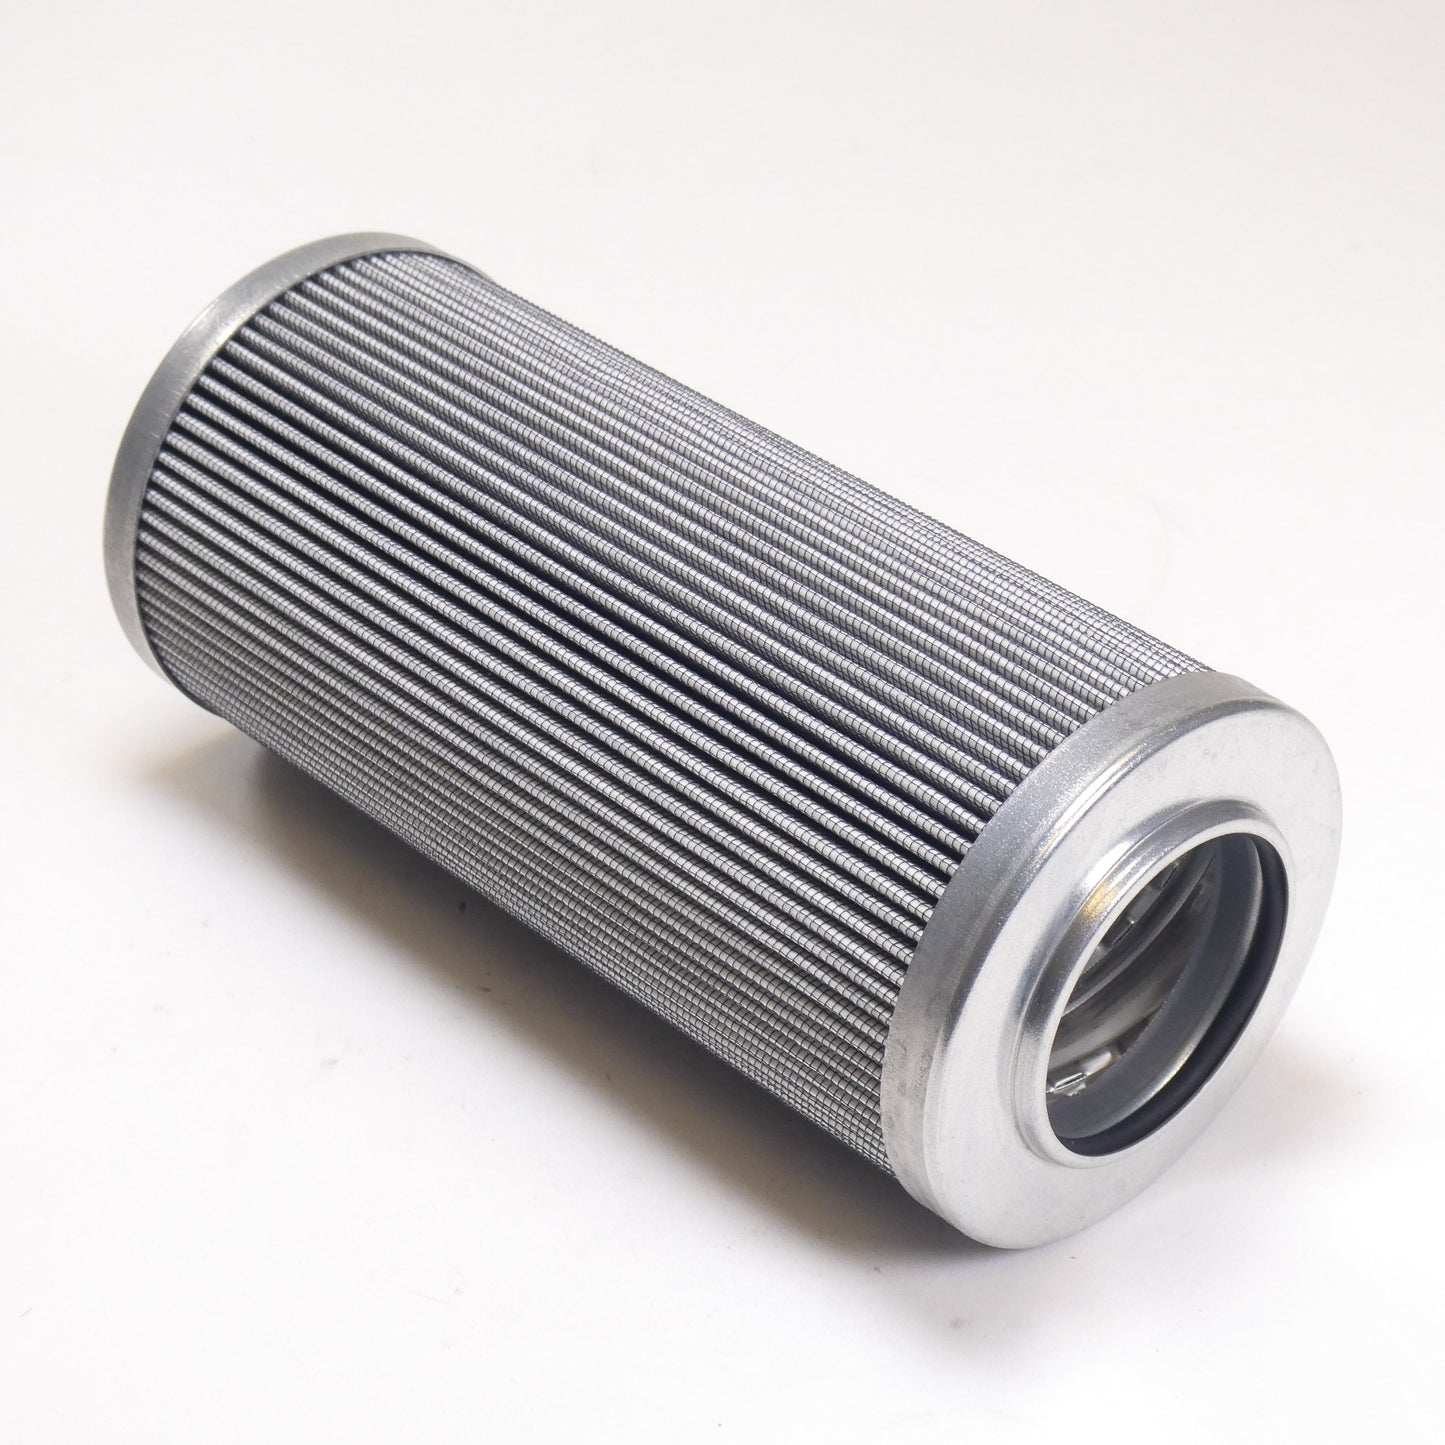 Hydrafil Replacement Filter Element for Separation Technologies 2890L03B08